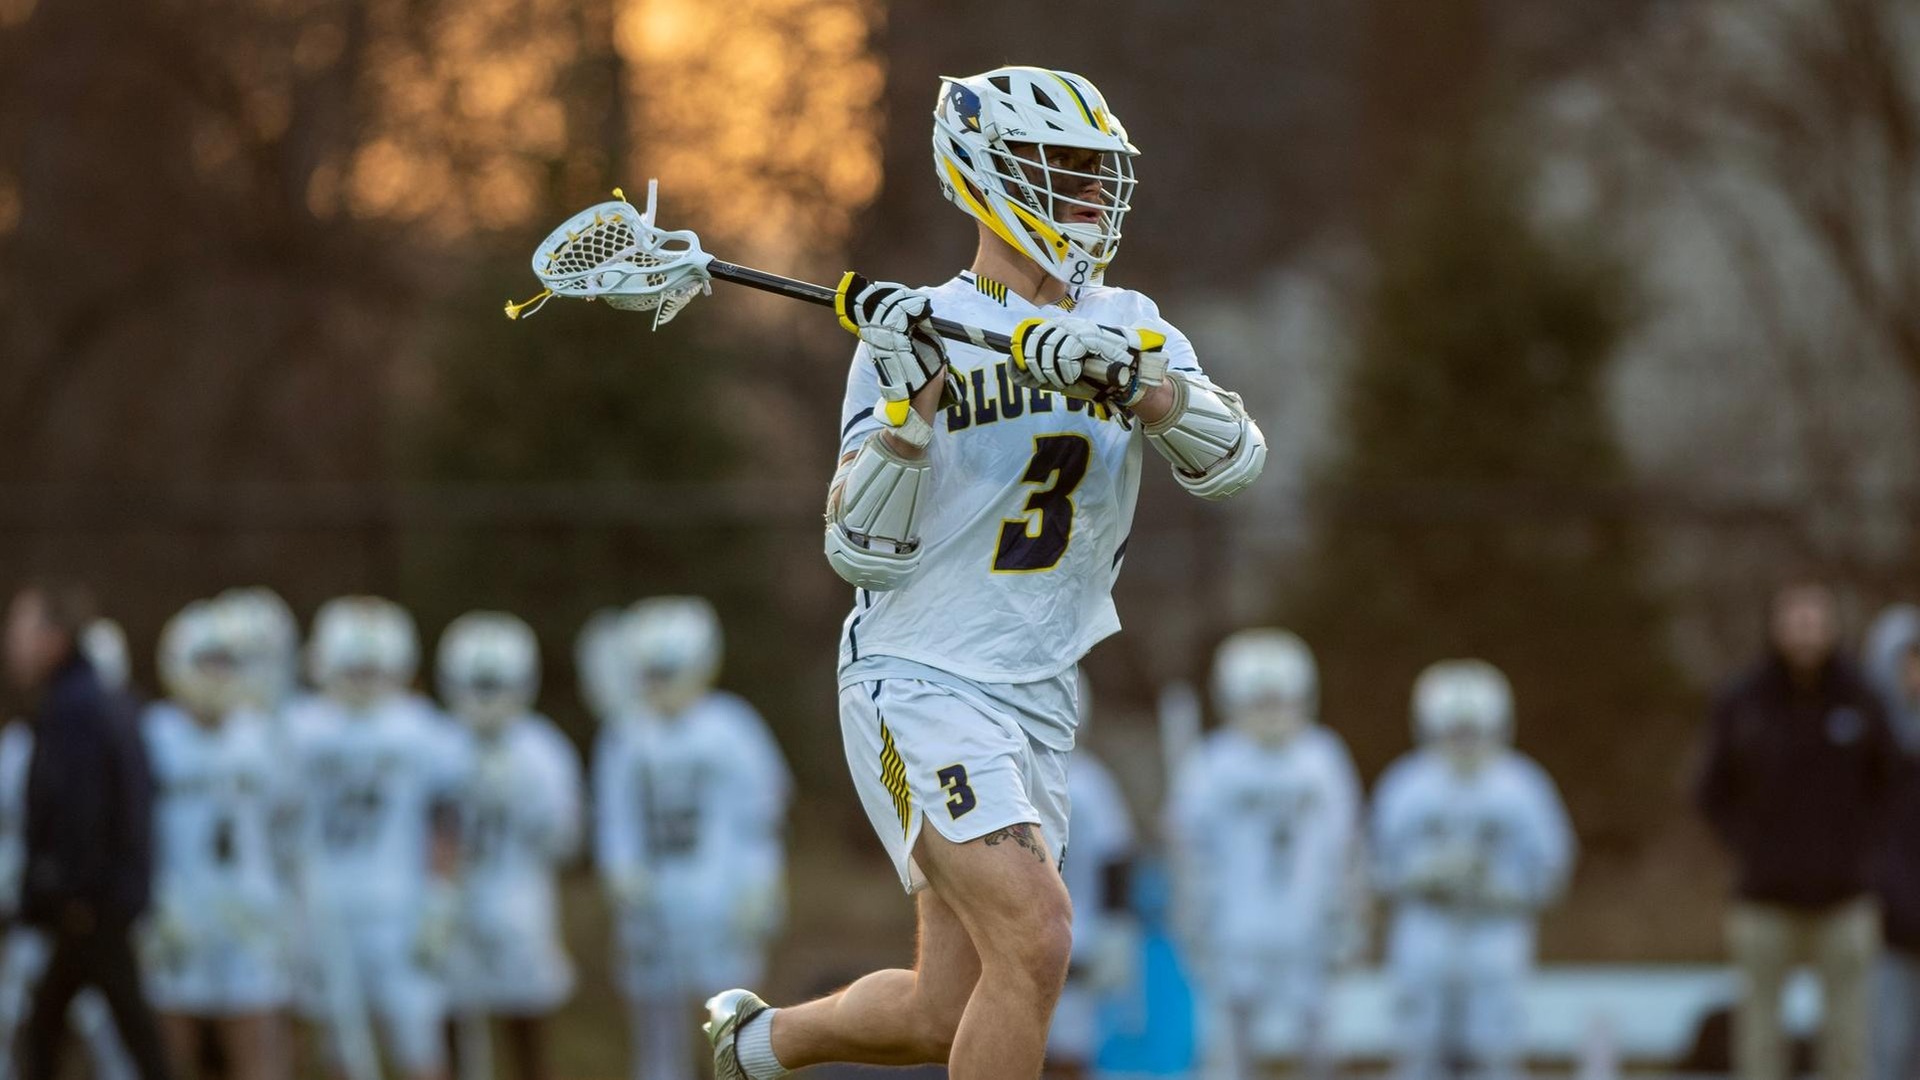 No. 6 Men's Lacrosse Uses Late Comeback to Stun No. 2 Lasell in Overtime, 10-9, Advances to First GNAC Title Game